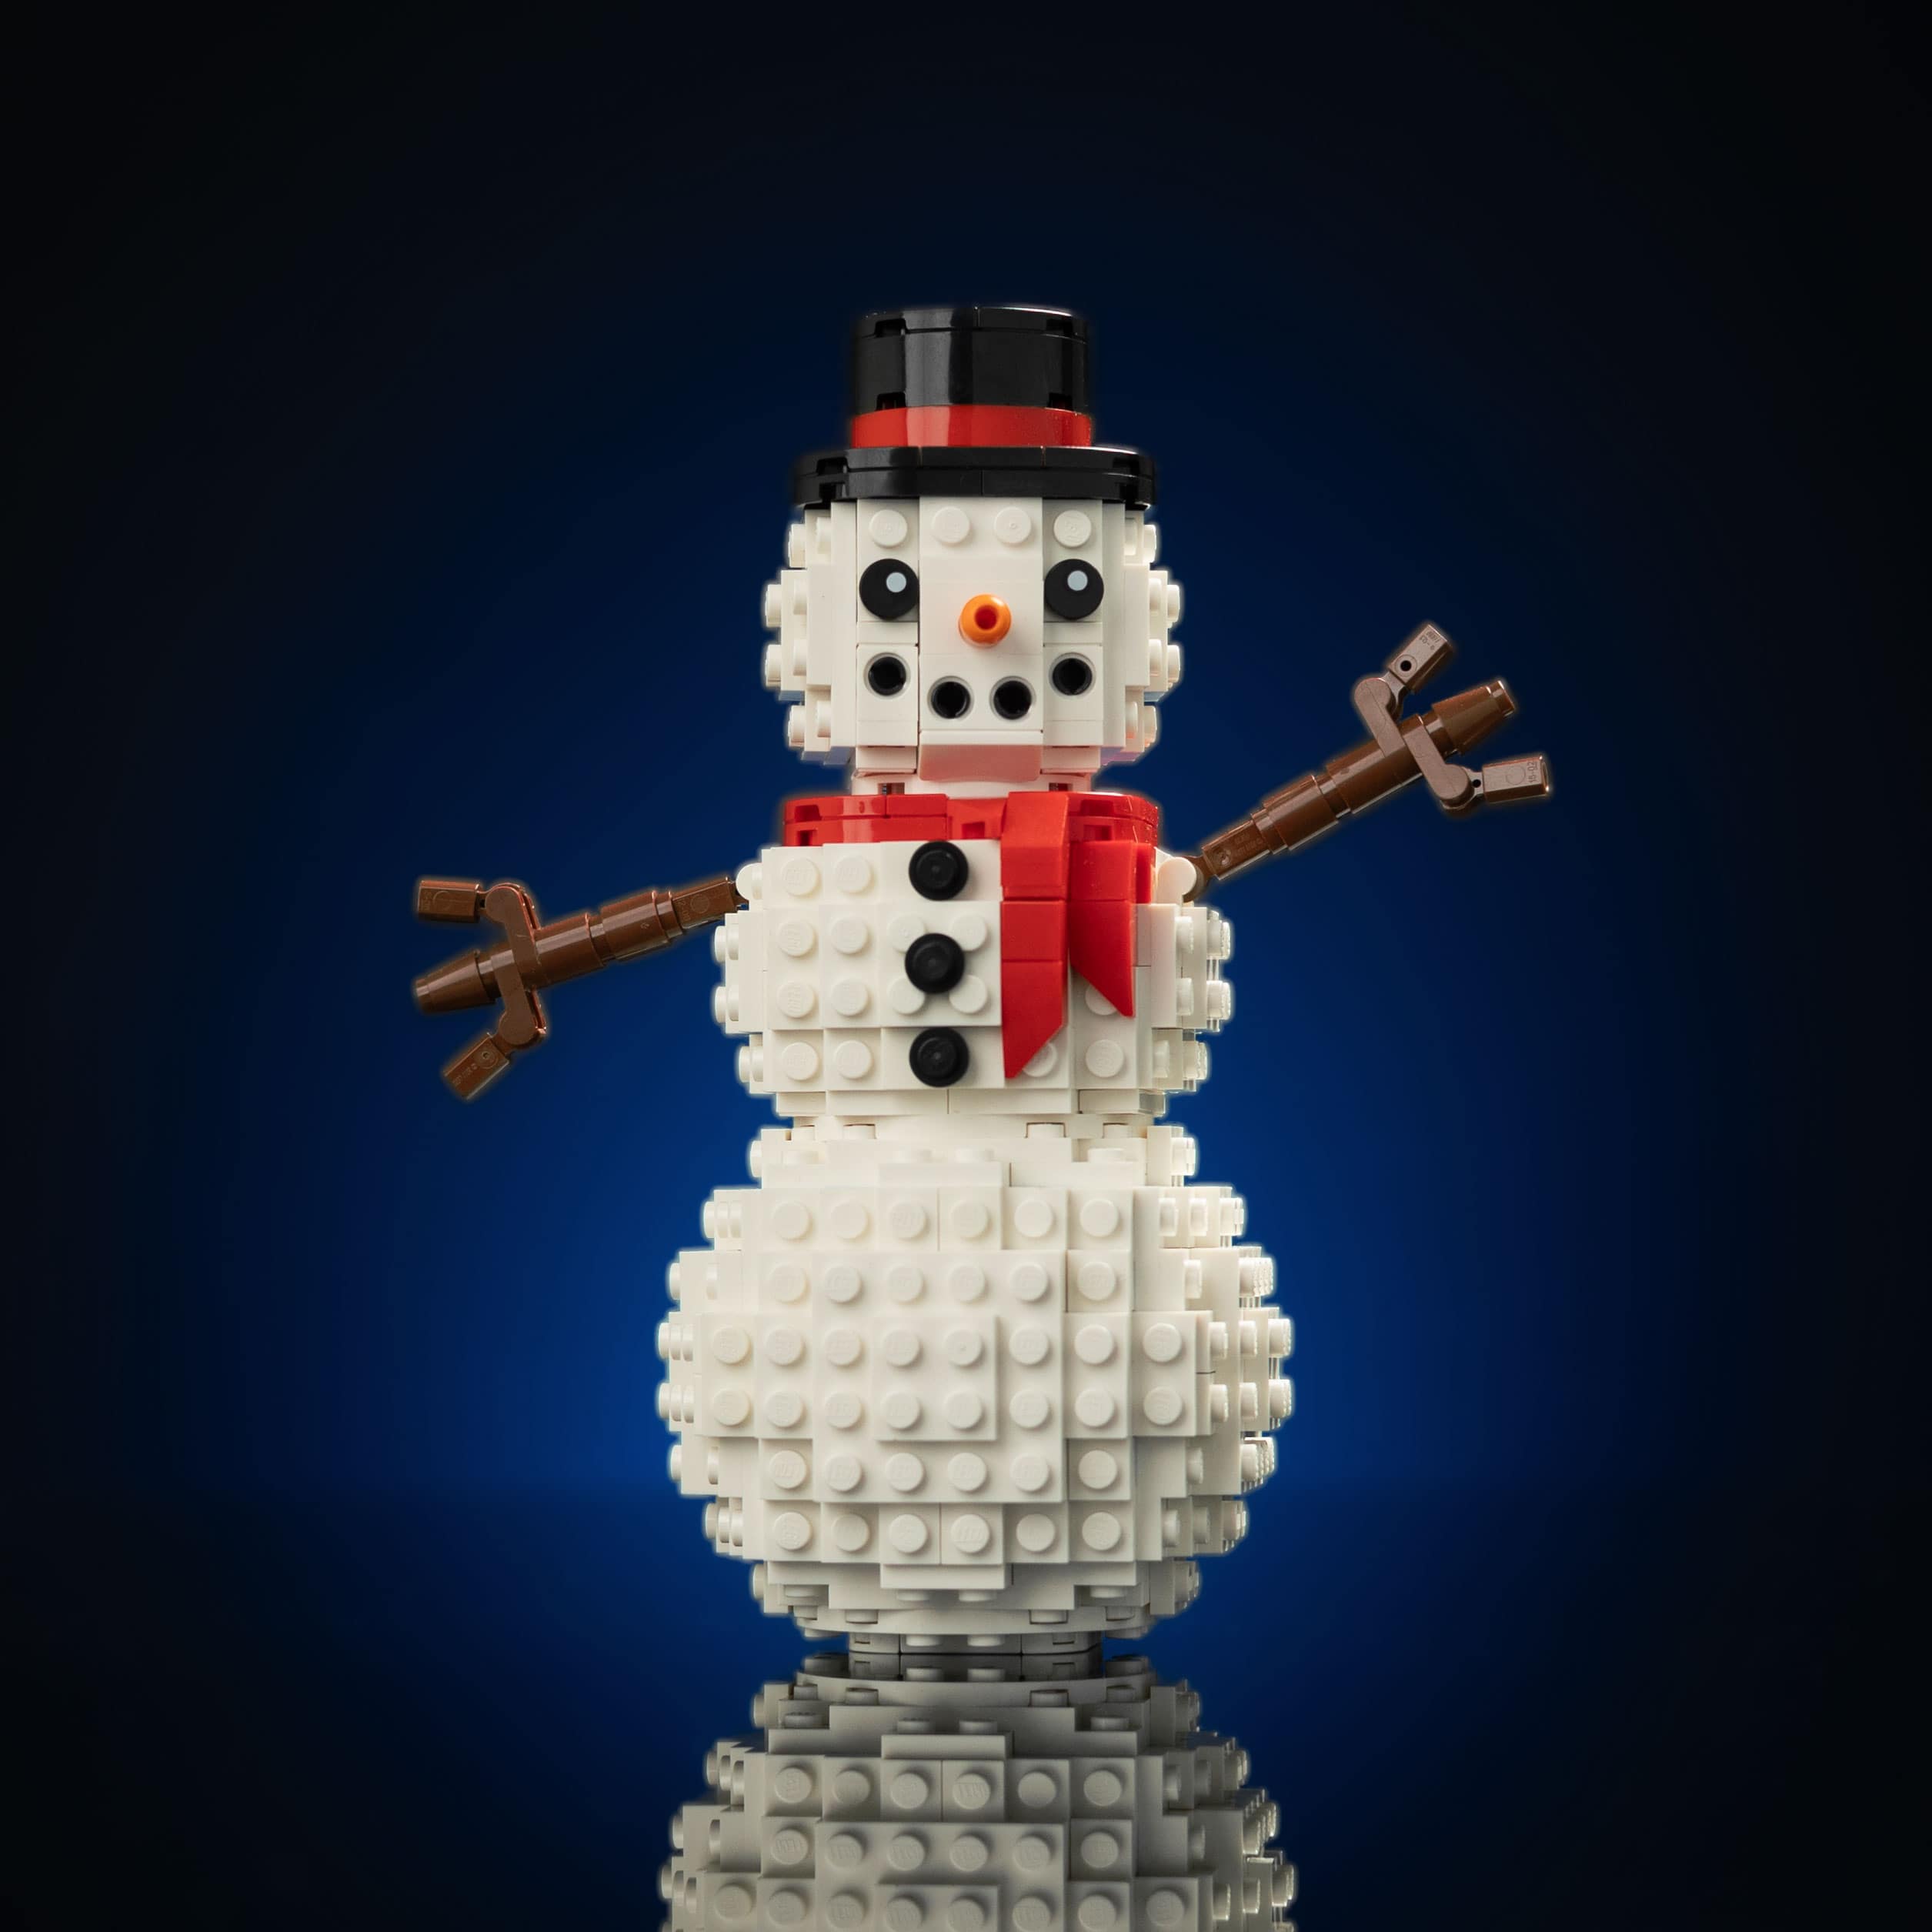 New Lego Snow Character Building Kit snowman!! 25 Pieces FREE